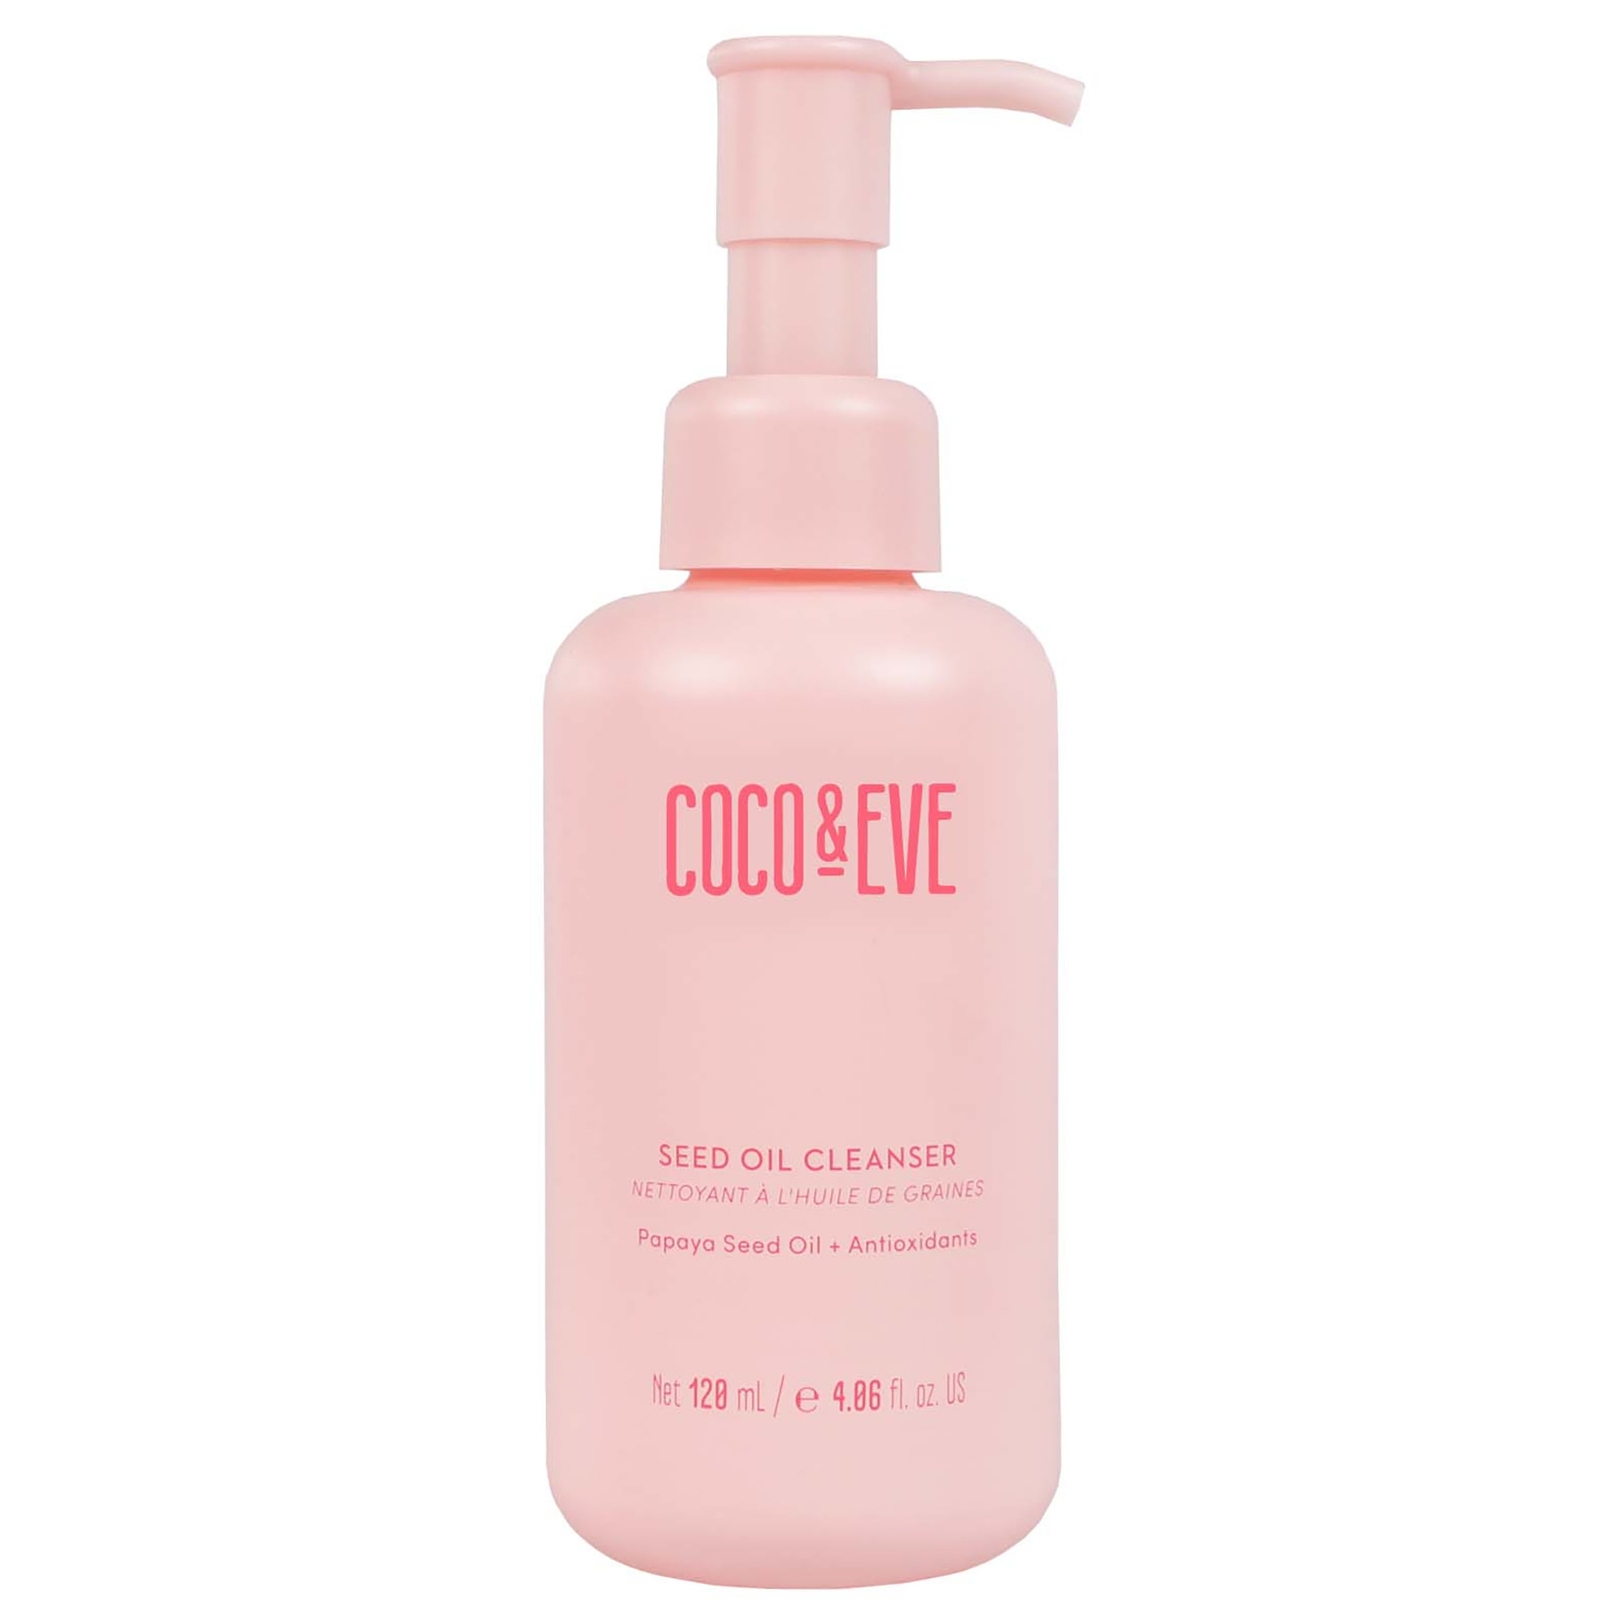 Coco & Eve Seed Oil Cleanser 120ml In Pink